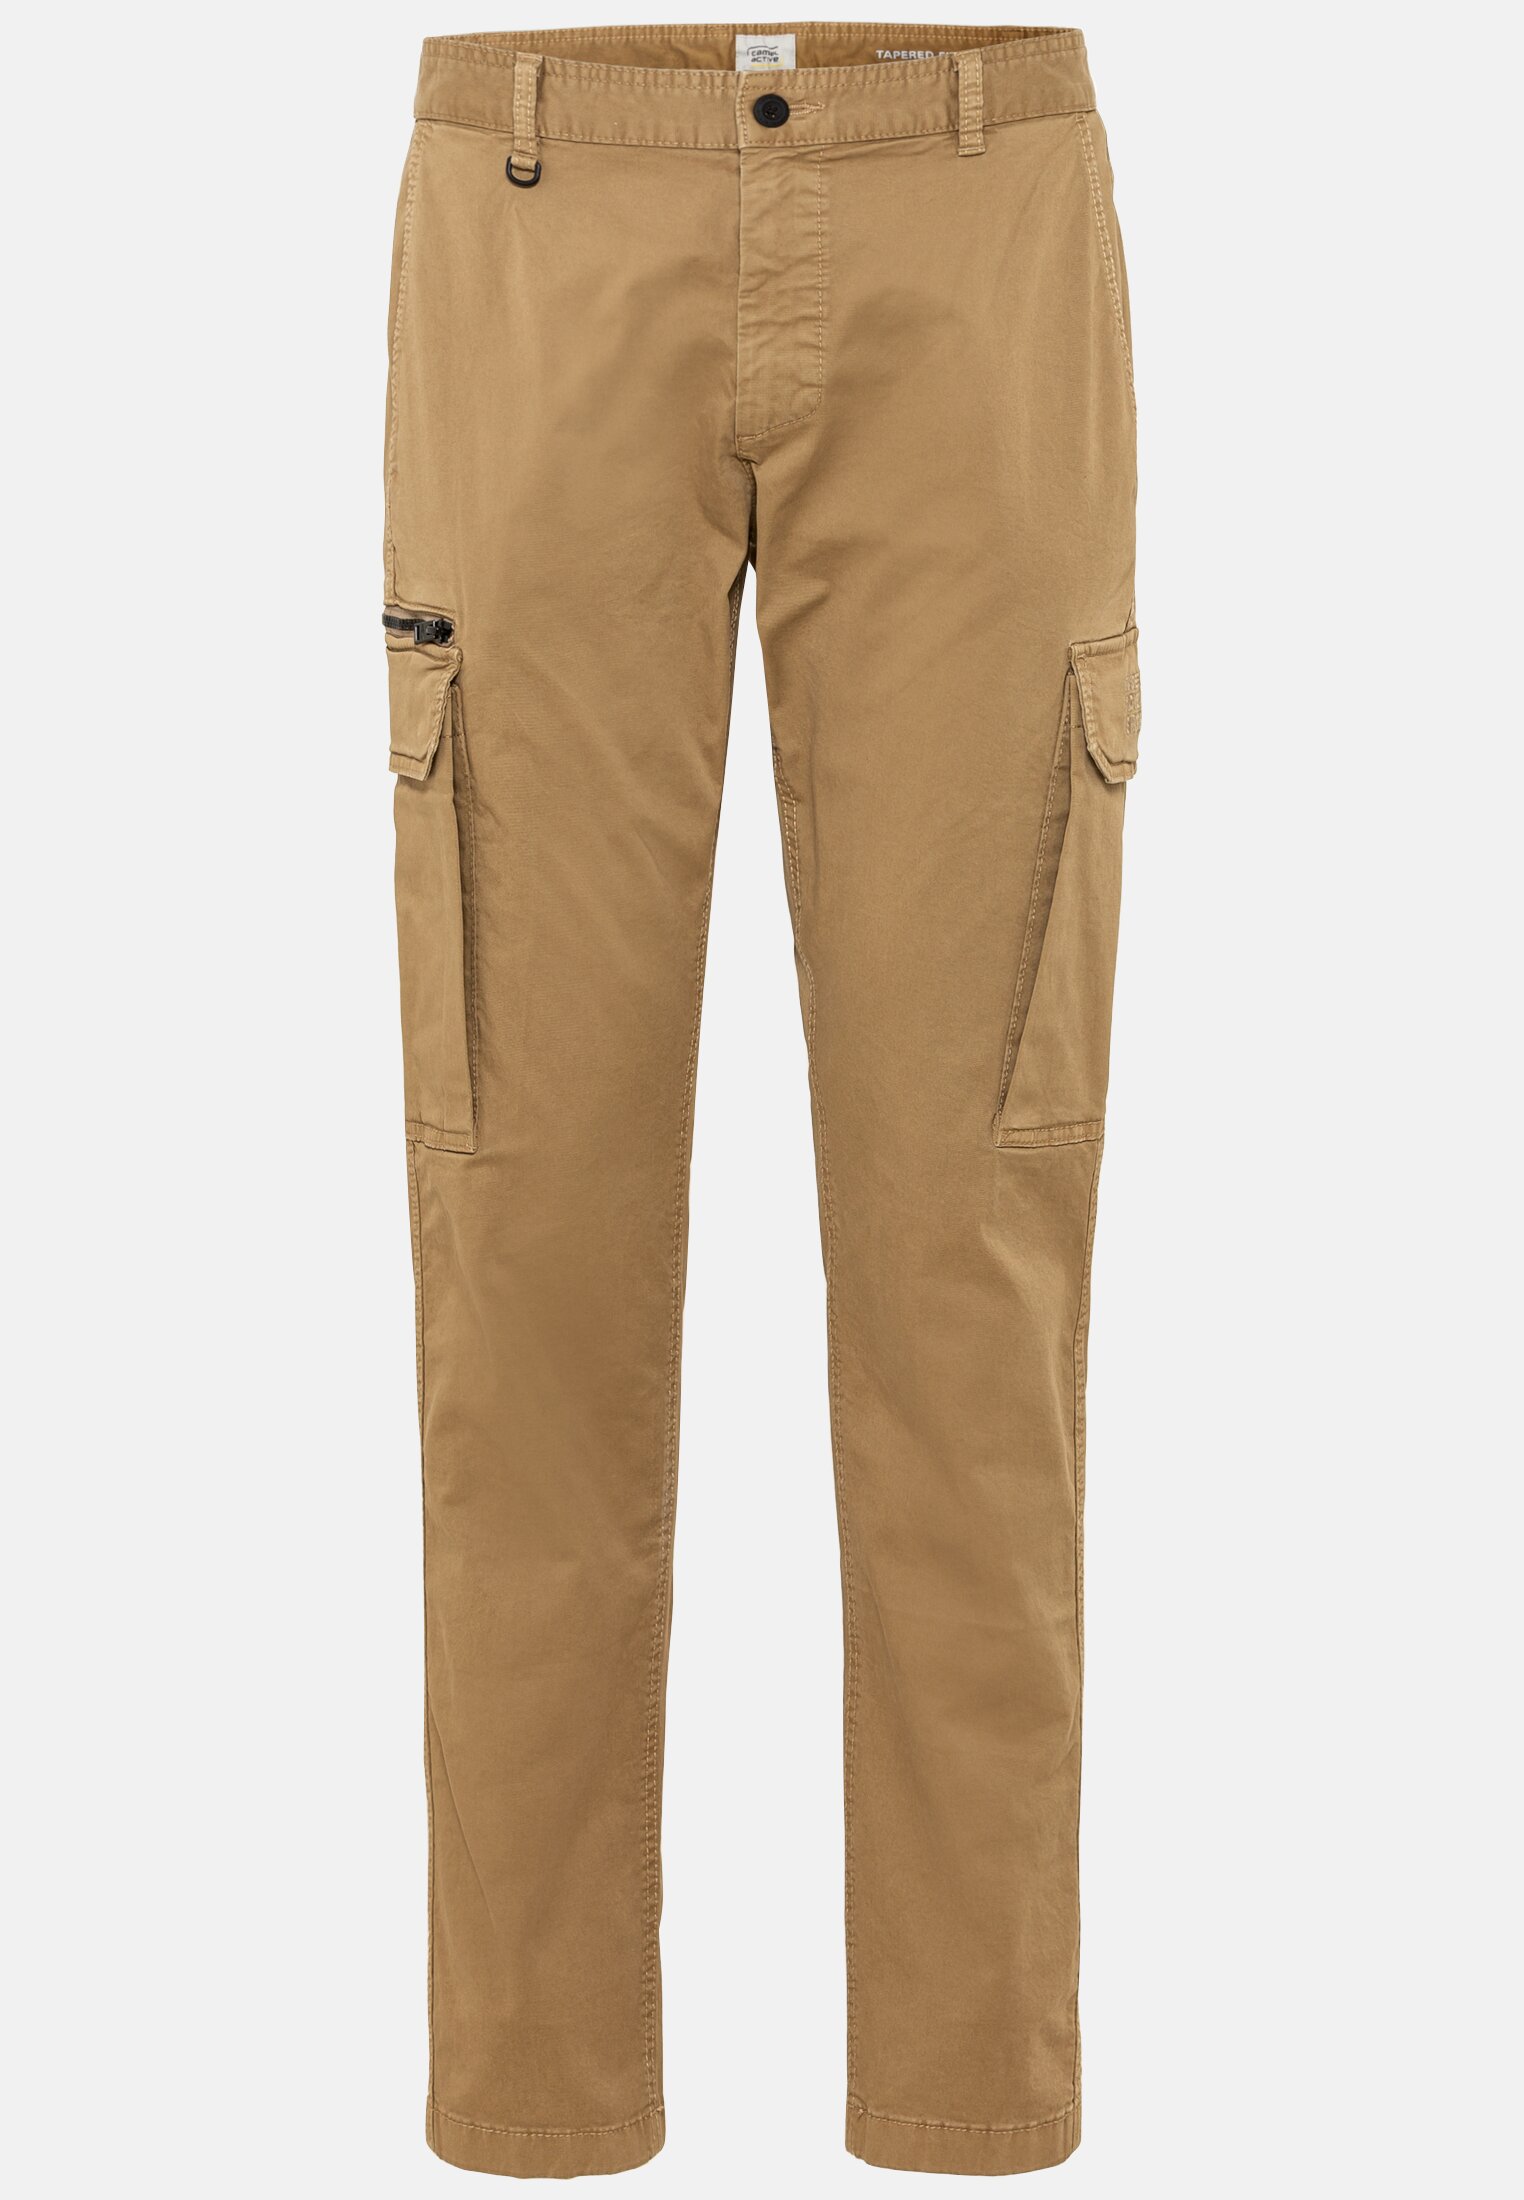 Camel Active Cargo pants in tapered fit